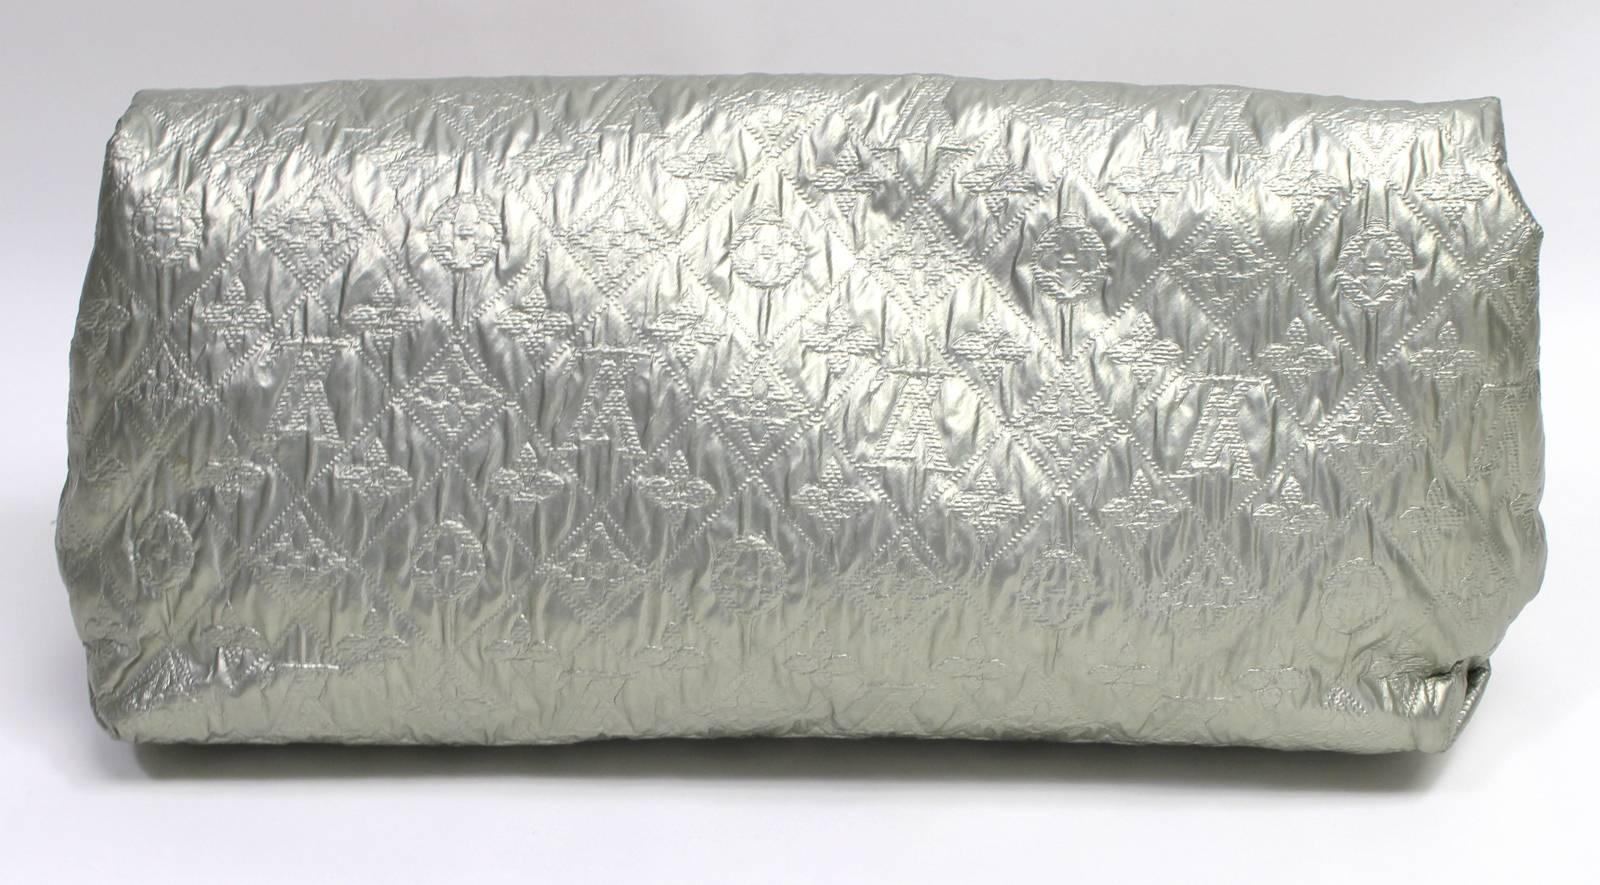 Louis Vuitton Silver Monogram Limelight GM Clutch- Excellent Plus Condition  
From the 2007 collection, the sophisticated piece complements any ensemble.  The exterior appears as new.
Matte silver oversized fabric clutch is quilted with signature